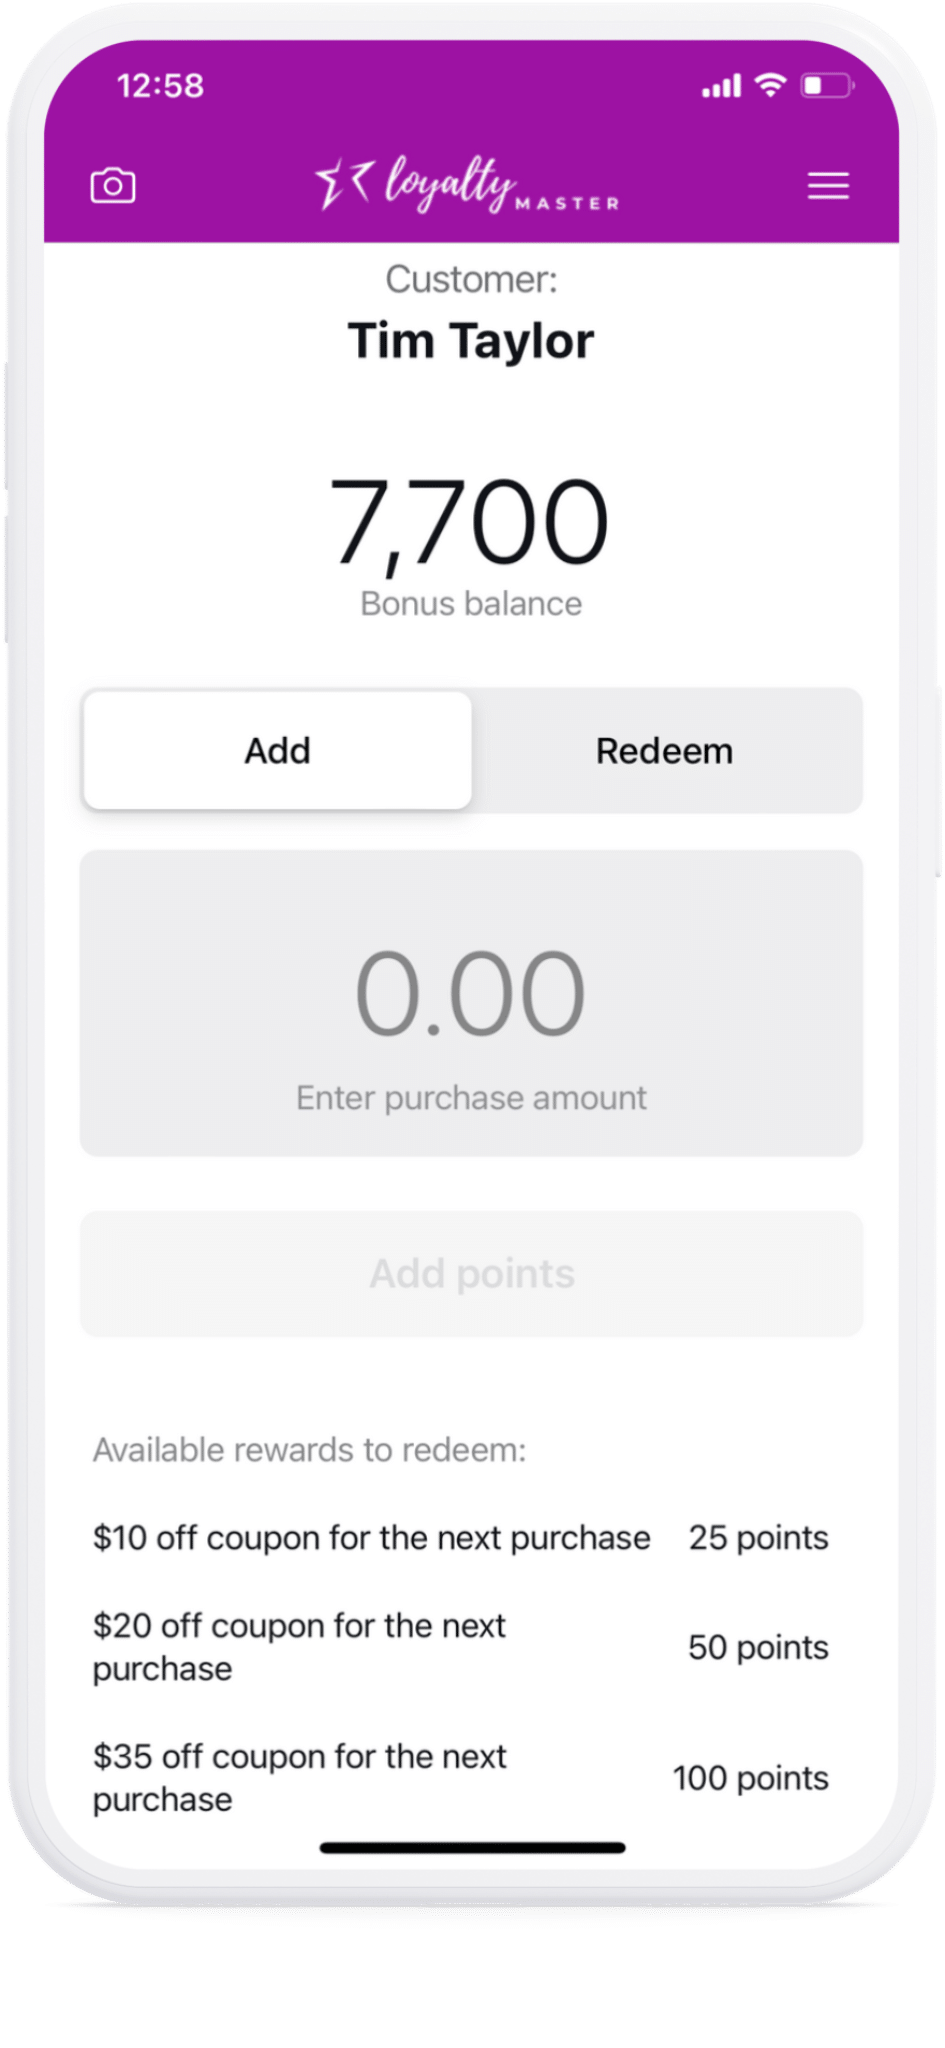 Mobile app screen showing a loyalty account with a points balance and options to add funds or redeem points for coupons.